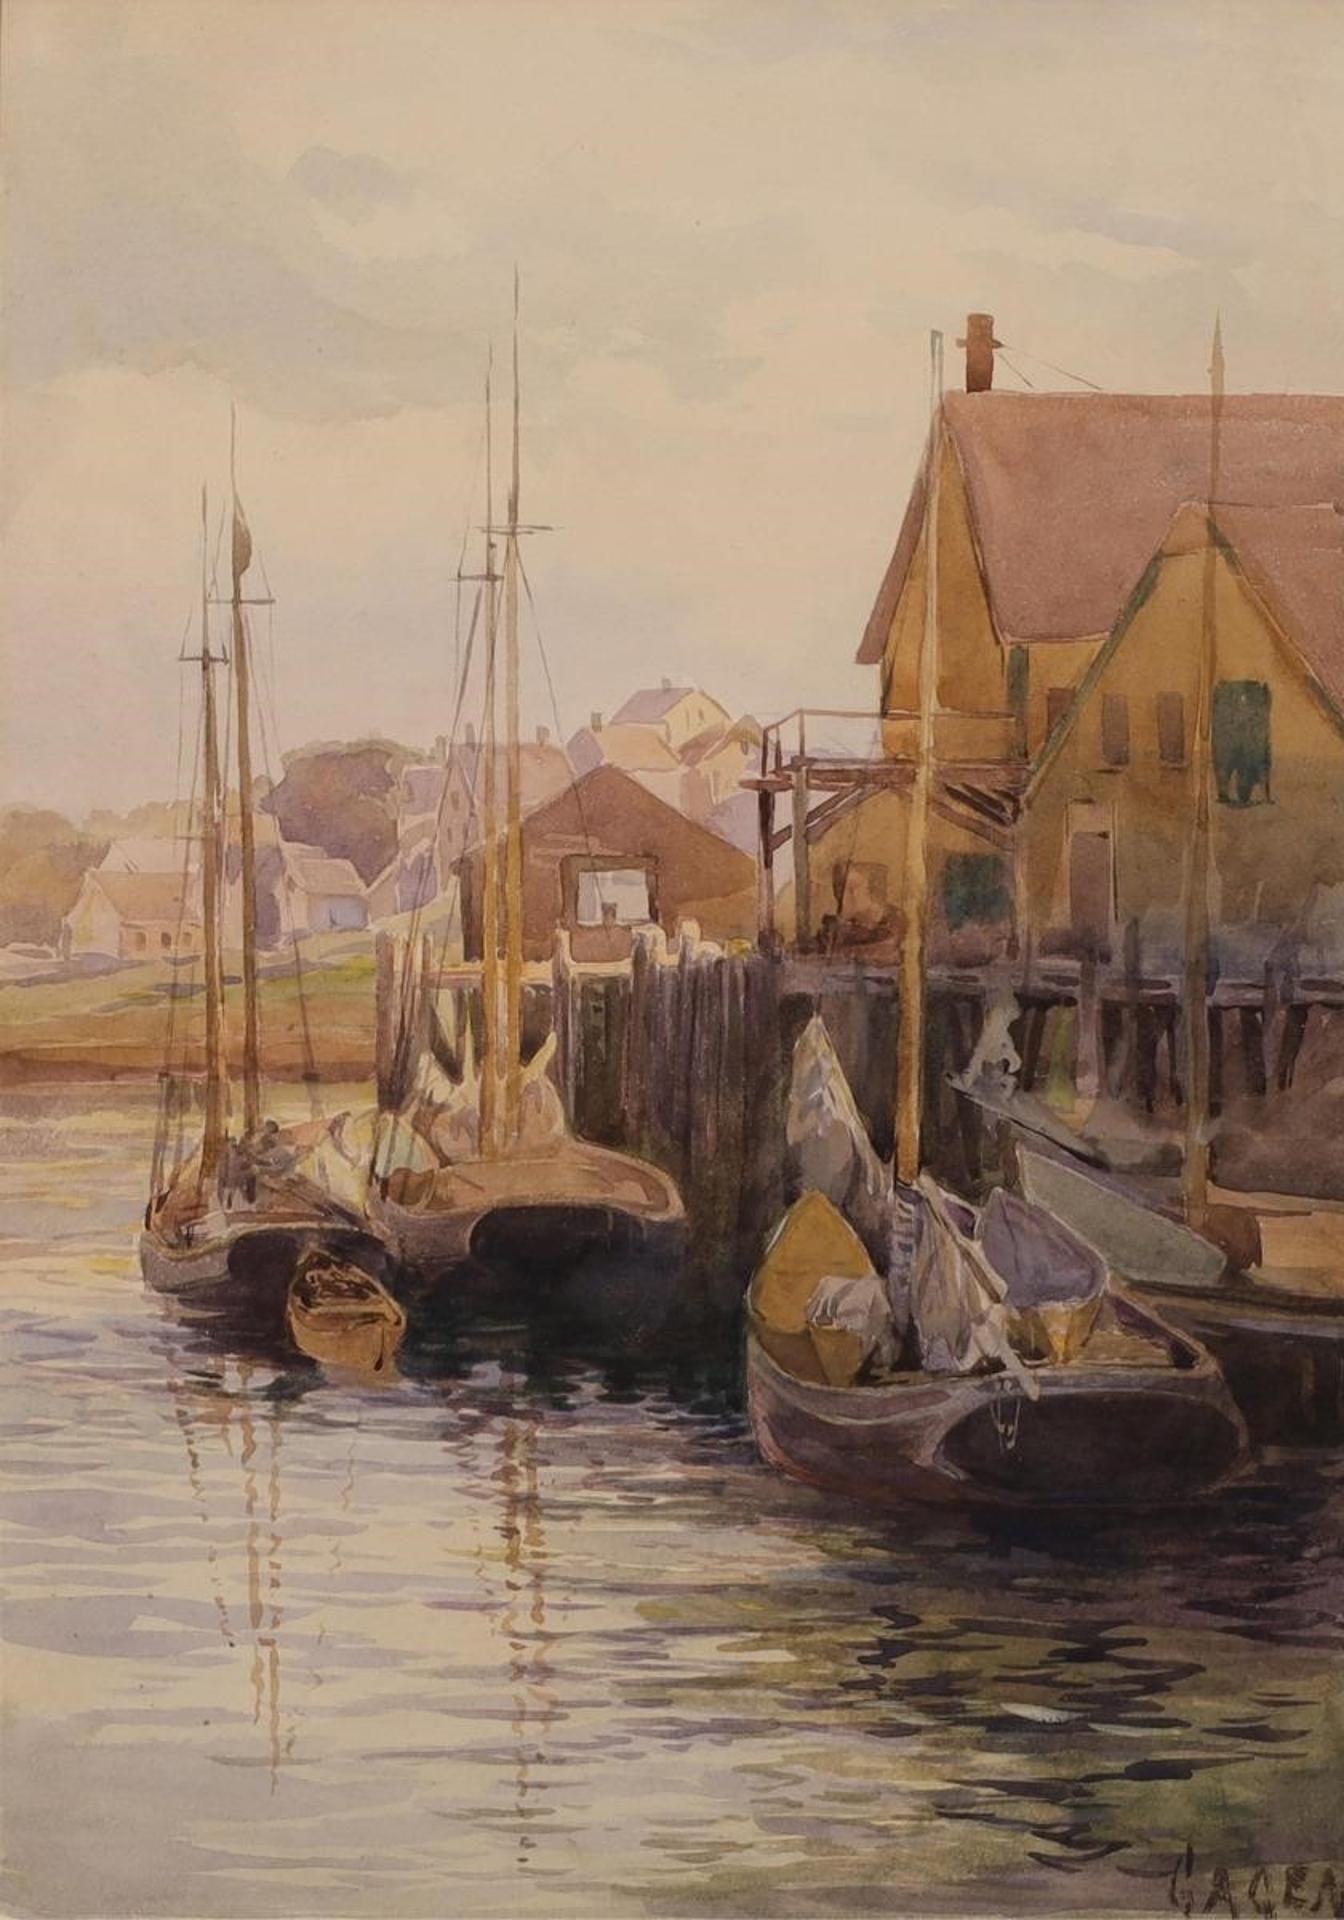 Robert Ford Gagen (1847-1926) - Wharf Scene, Late Afternoon